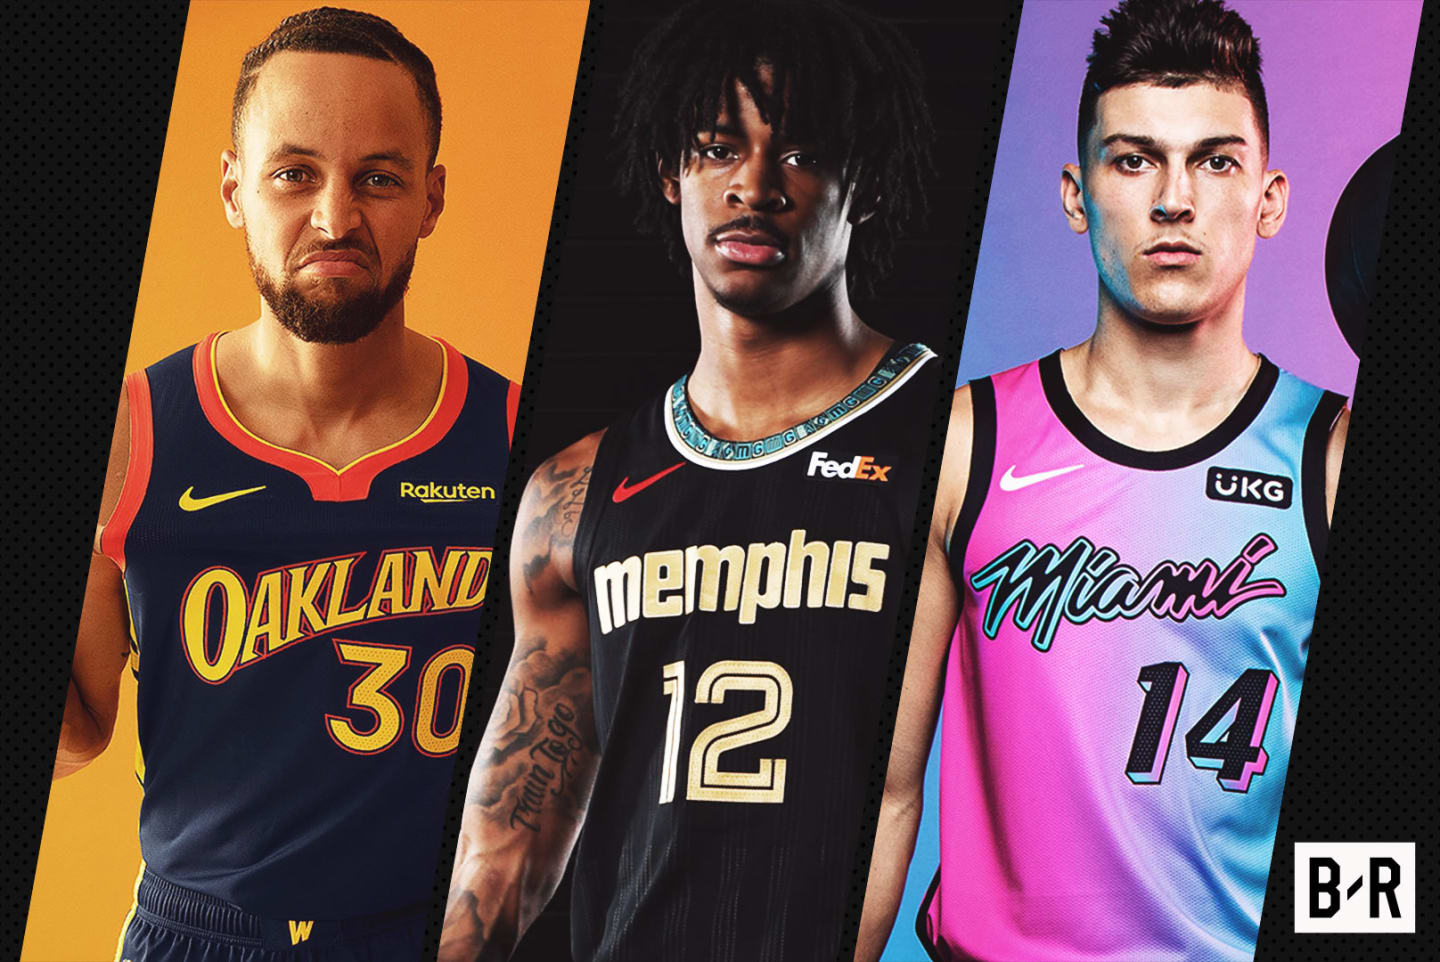 Ranking Every Nba Team S 2021 City Edition Jersey Bleacher Report Latest News Videos And Highlights